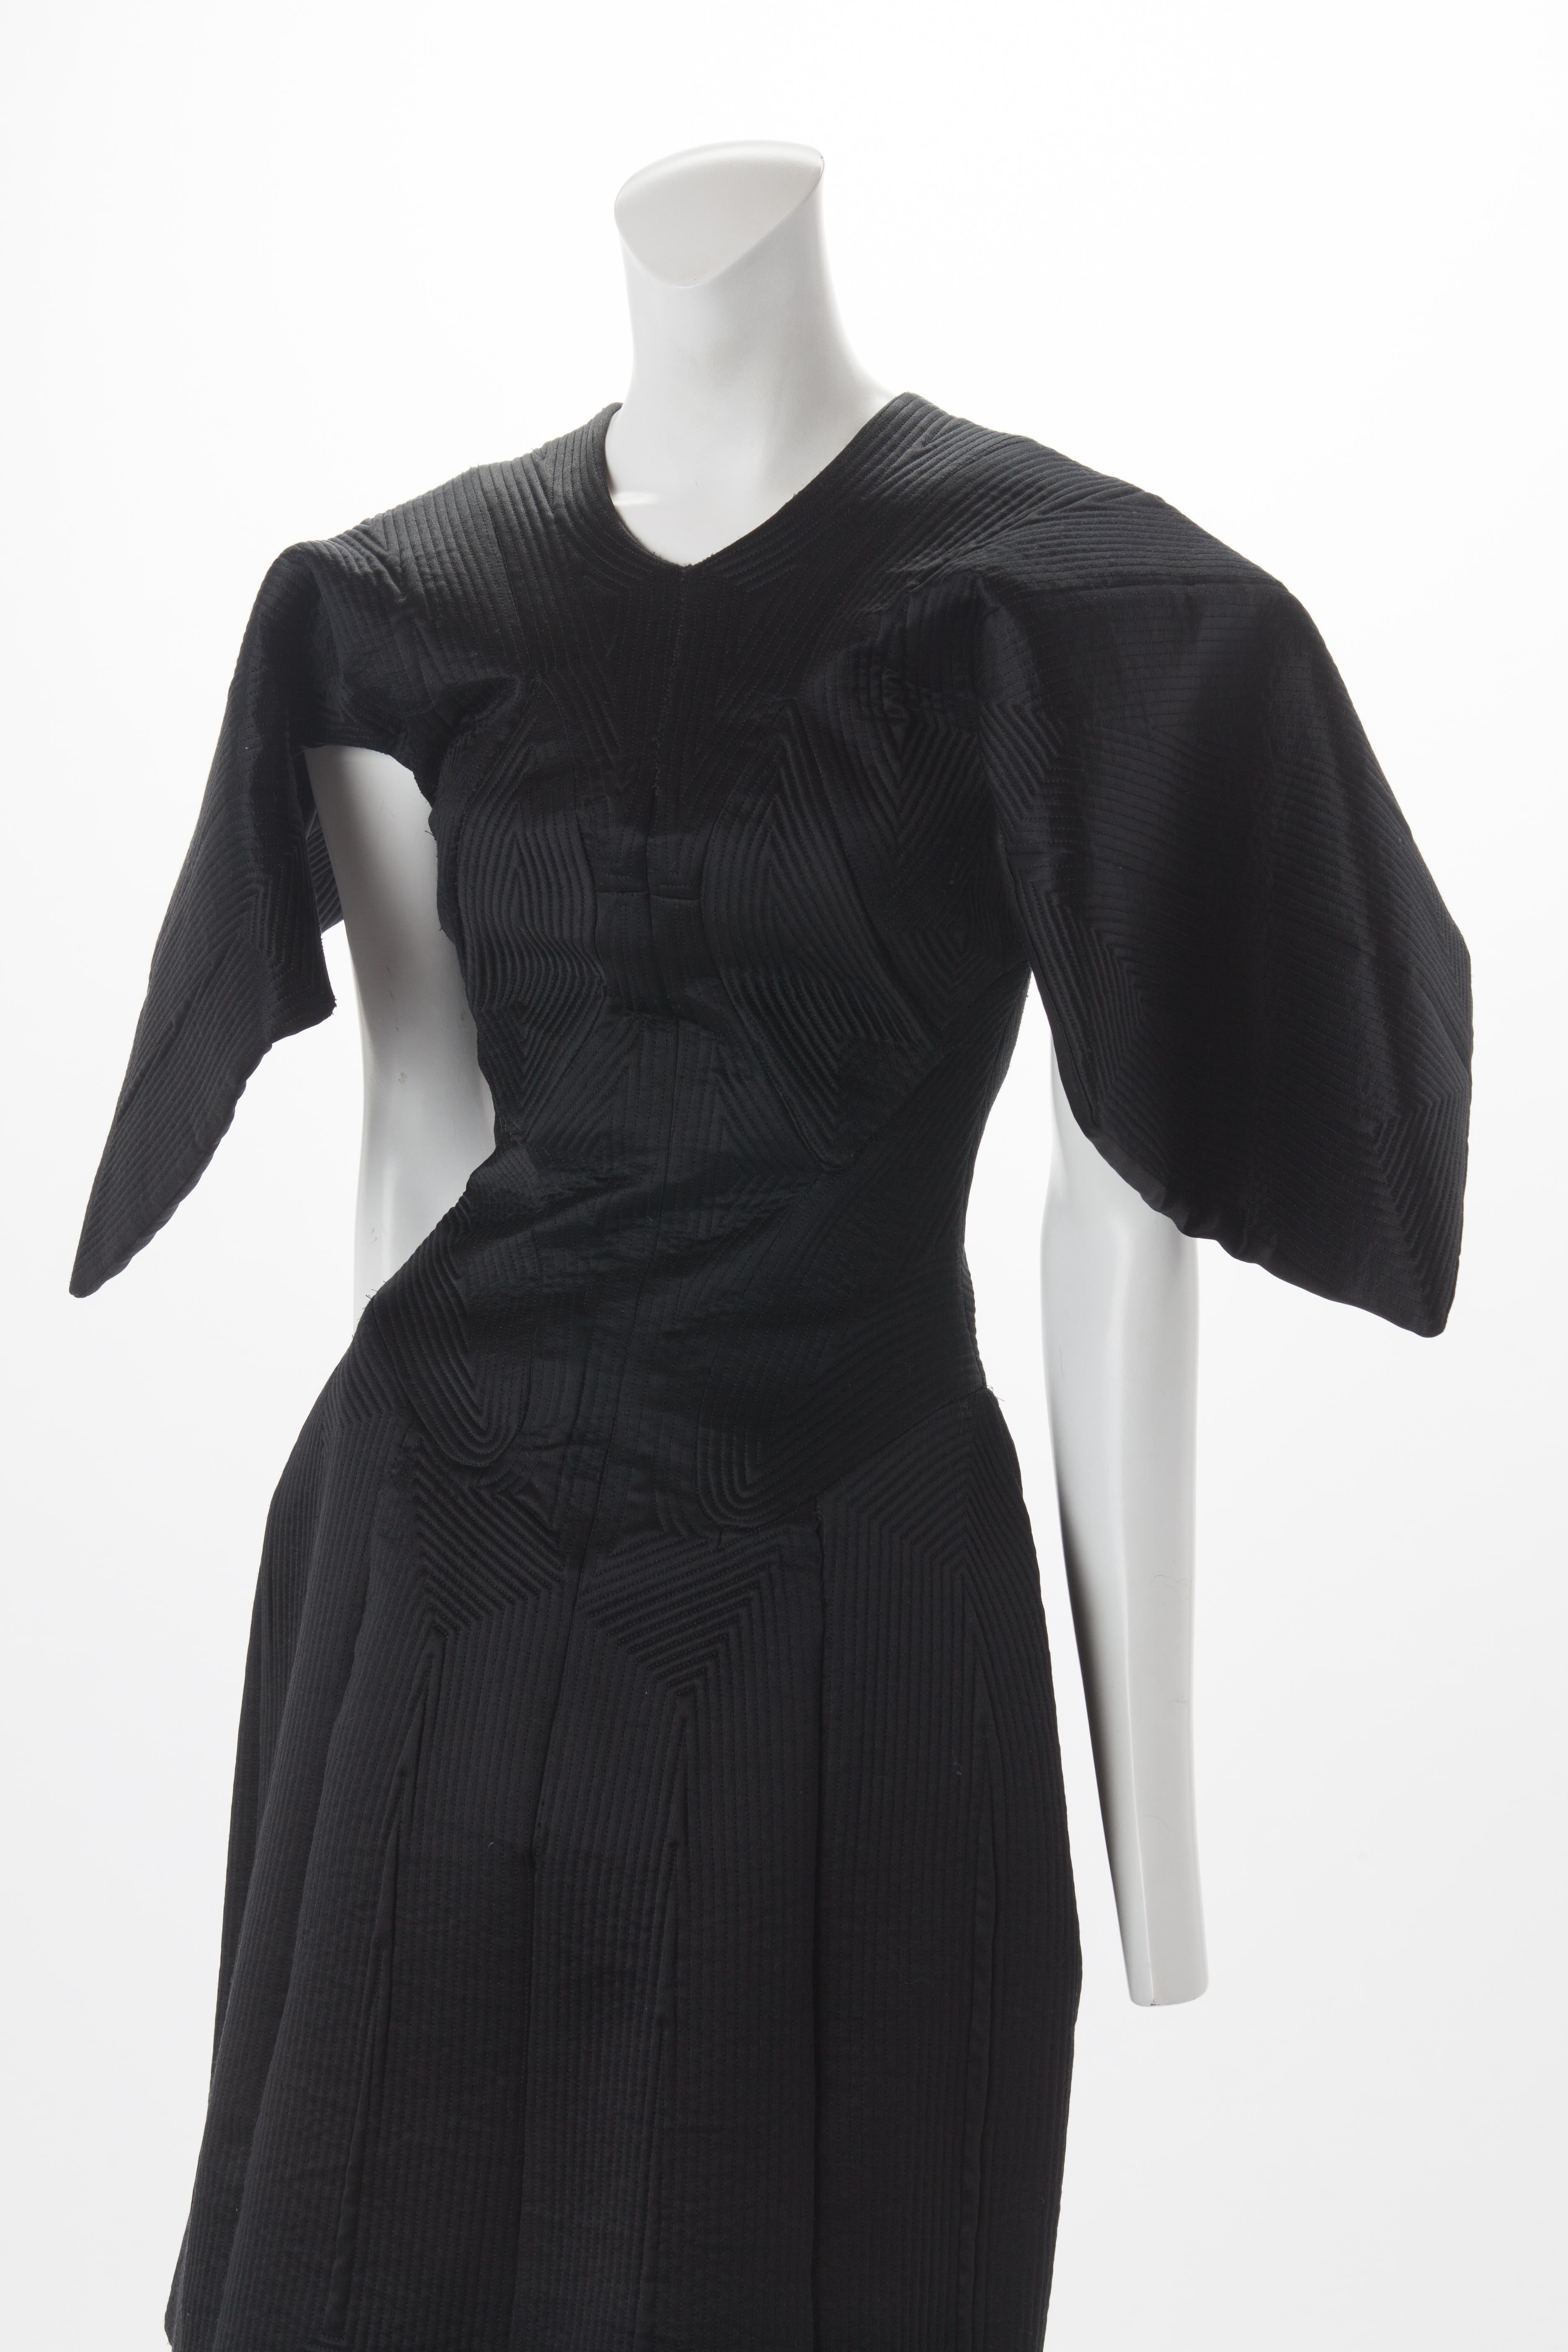 Alexander McQueen Black Quilted Satin Cocktail Dress with Batwing Sleeves, 2009.
Quilted structured dress with seaming creating geometric pattern throughout. Batwing mid-length sleeves that create a cape-like look from the back of this dress. Hidden